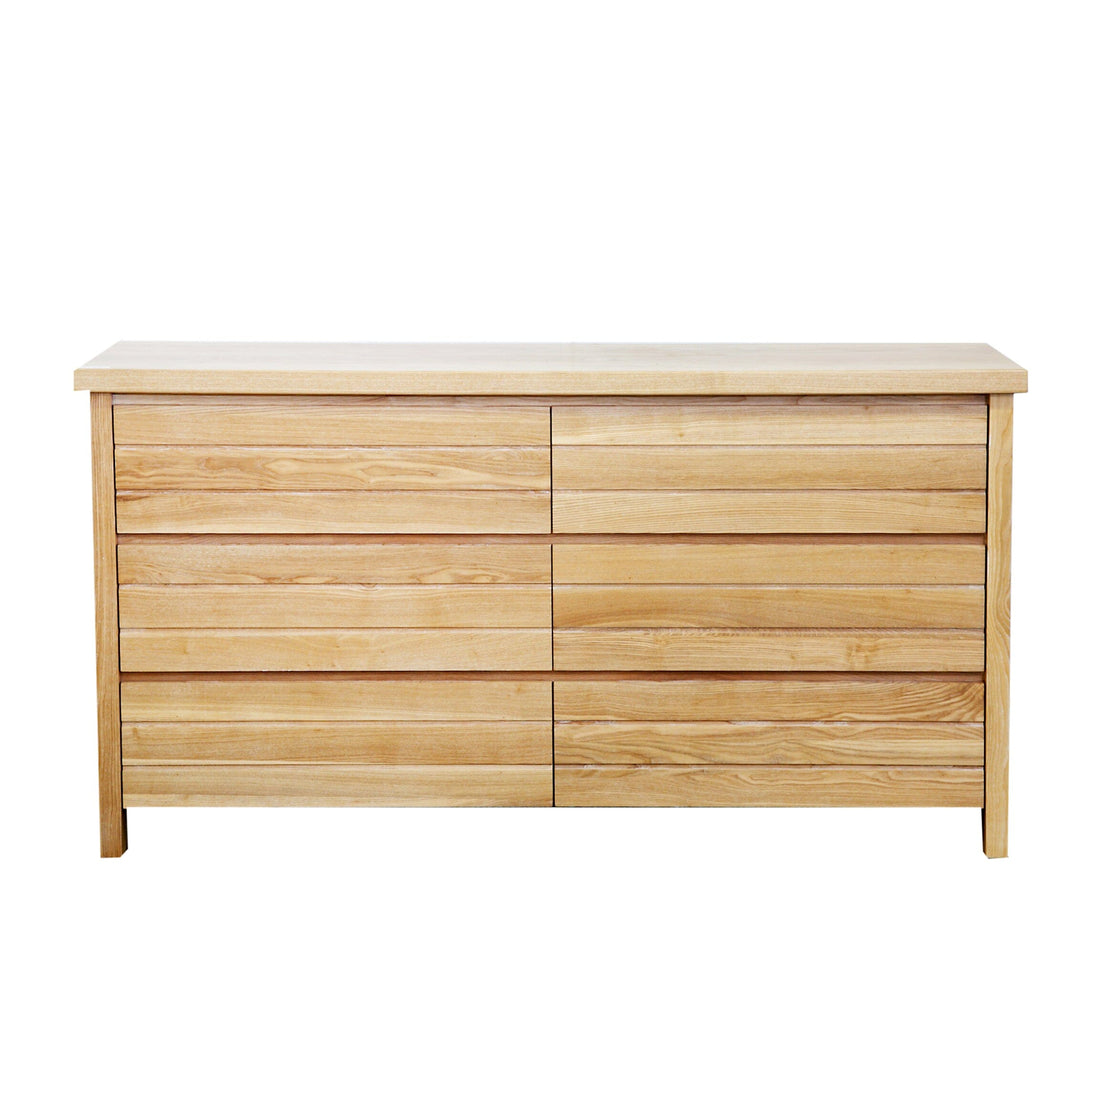 Coast Chest of Drawers L1400mm Bedroom Furniture Beachwood Designs Limed Ash 